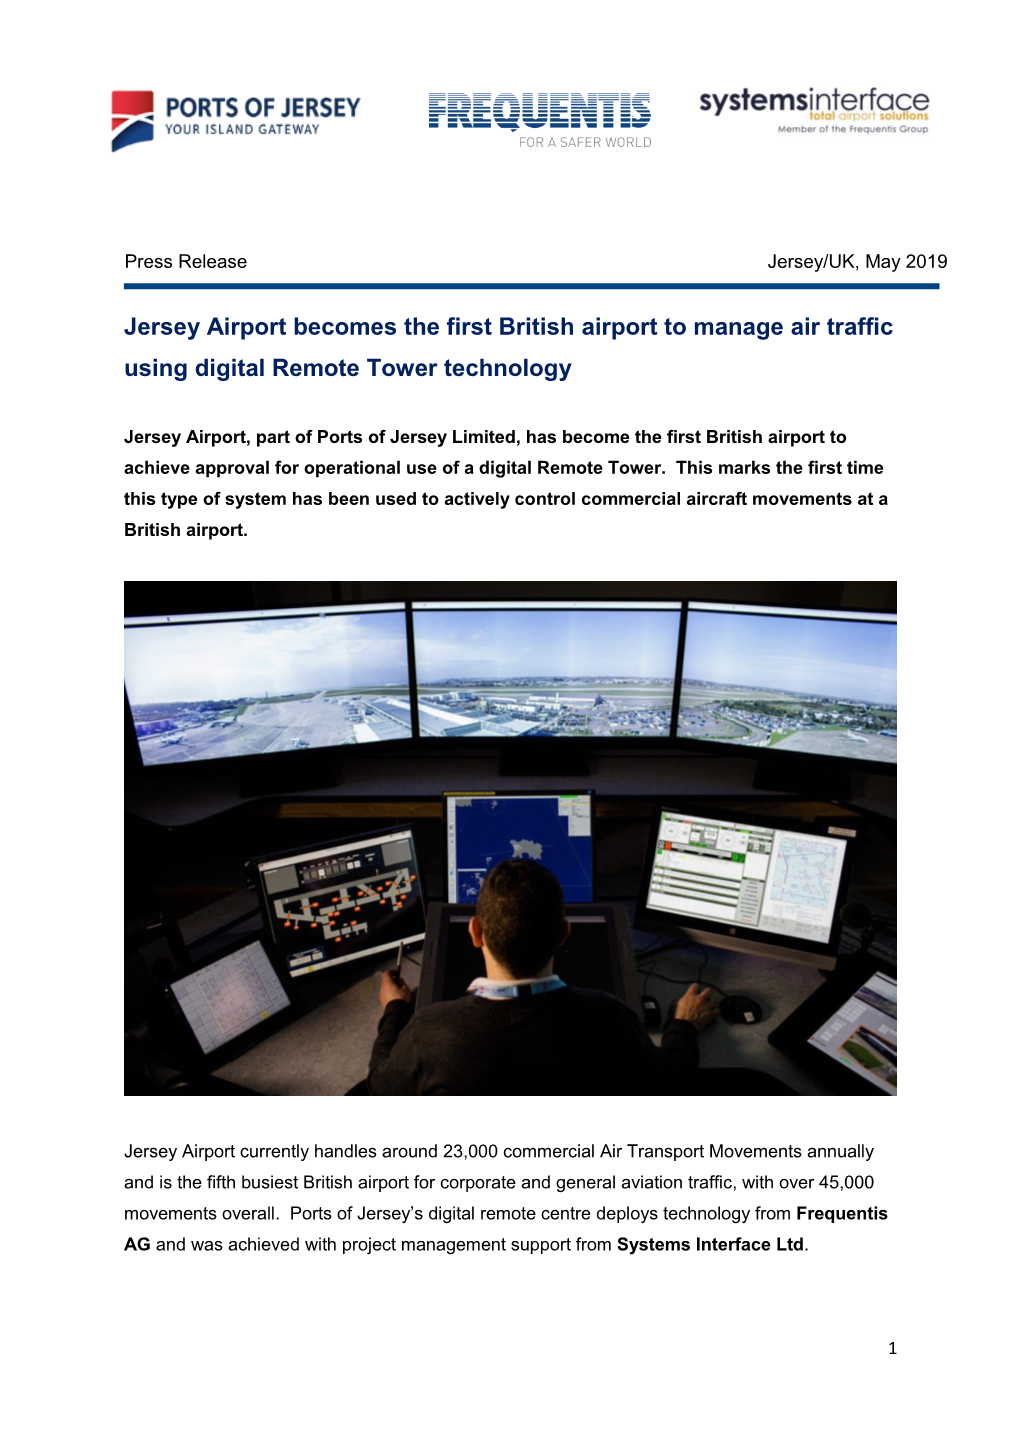 Jersey Airport Becomes the First British Airport to Manage Air Traffic Using Digital Remote Tower Technology